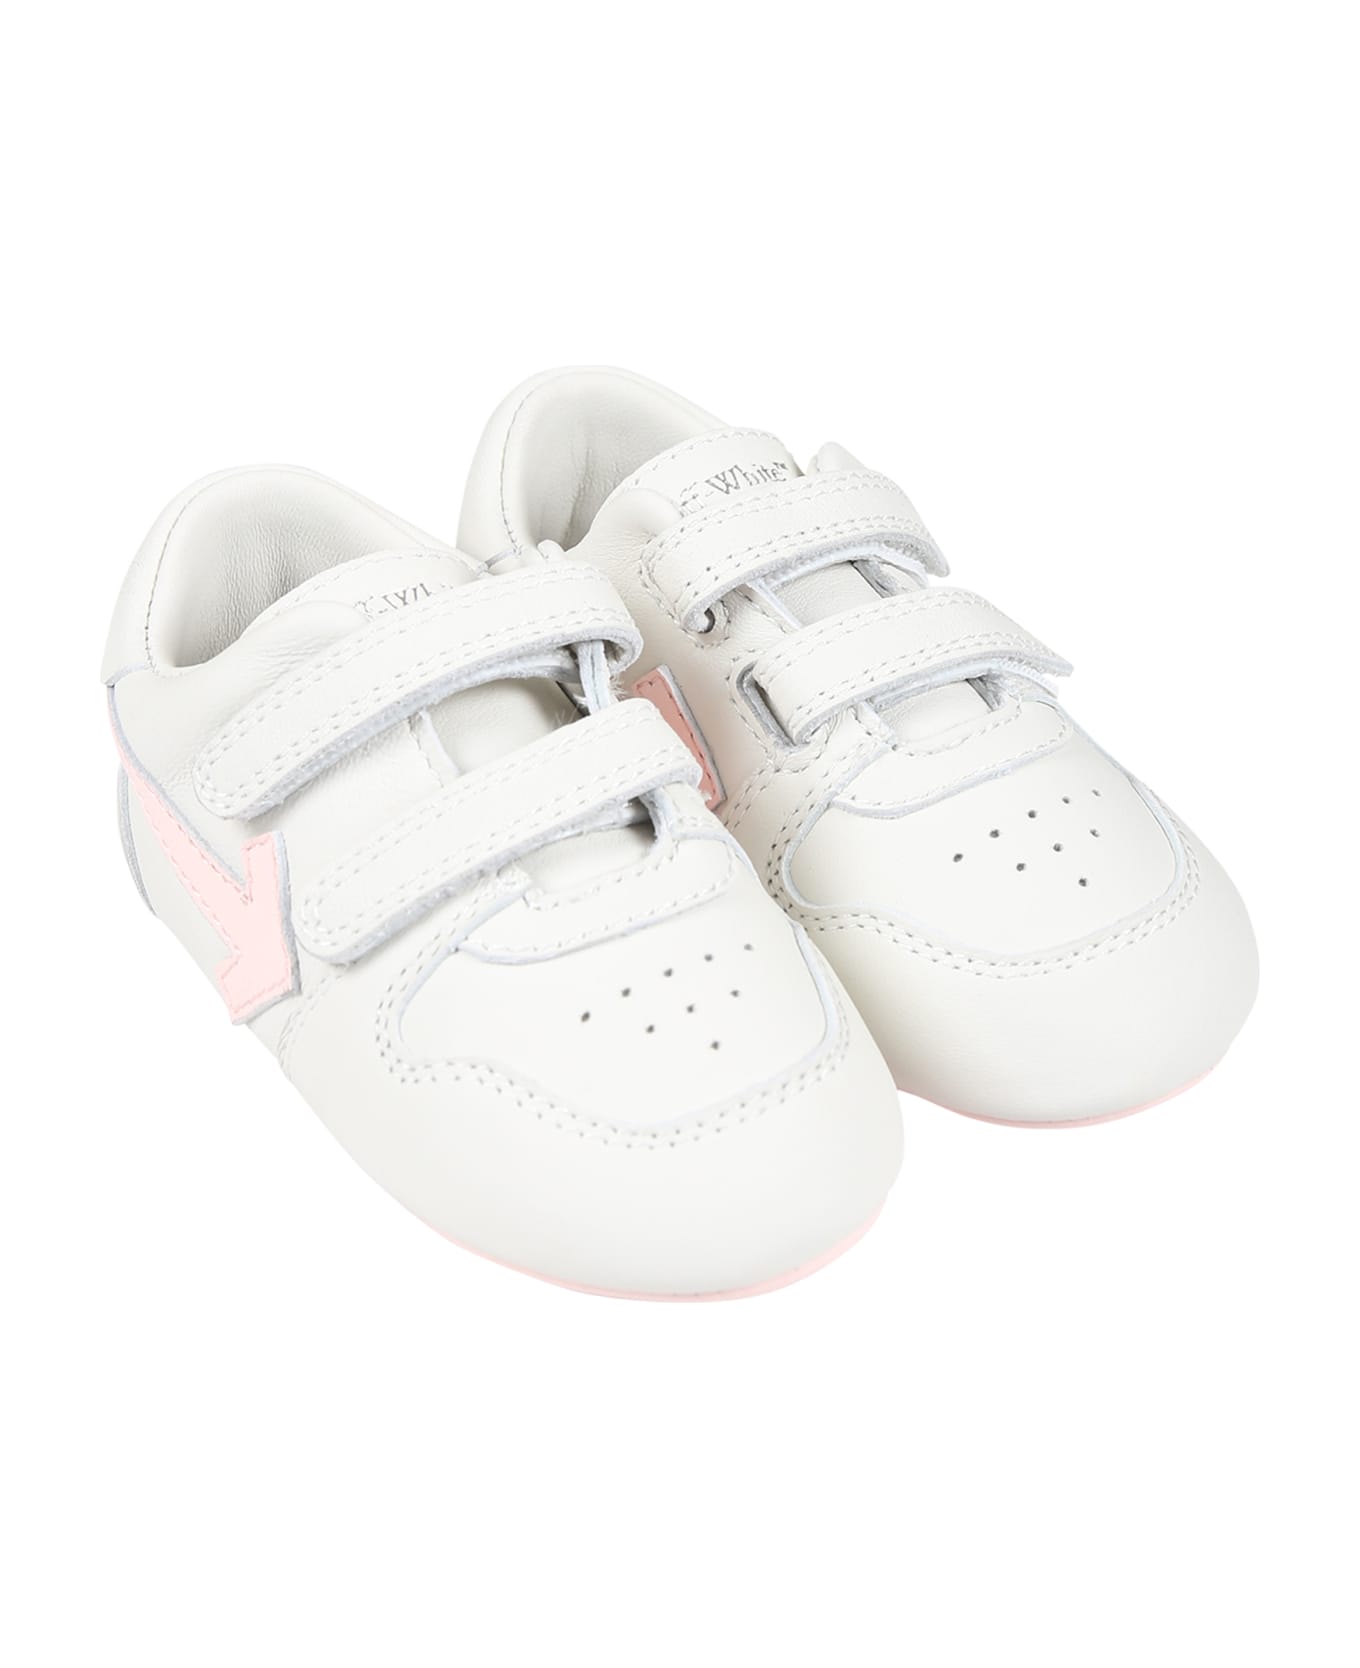 Off-White Grey Sneaker For Baby Girl With Arrows - White